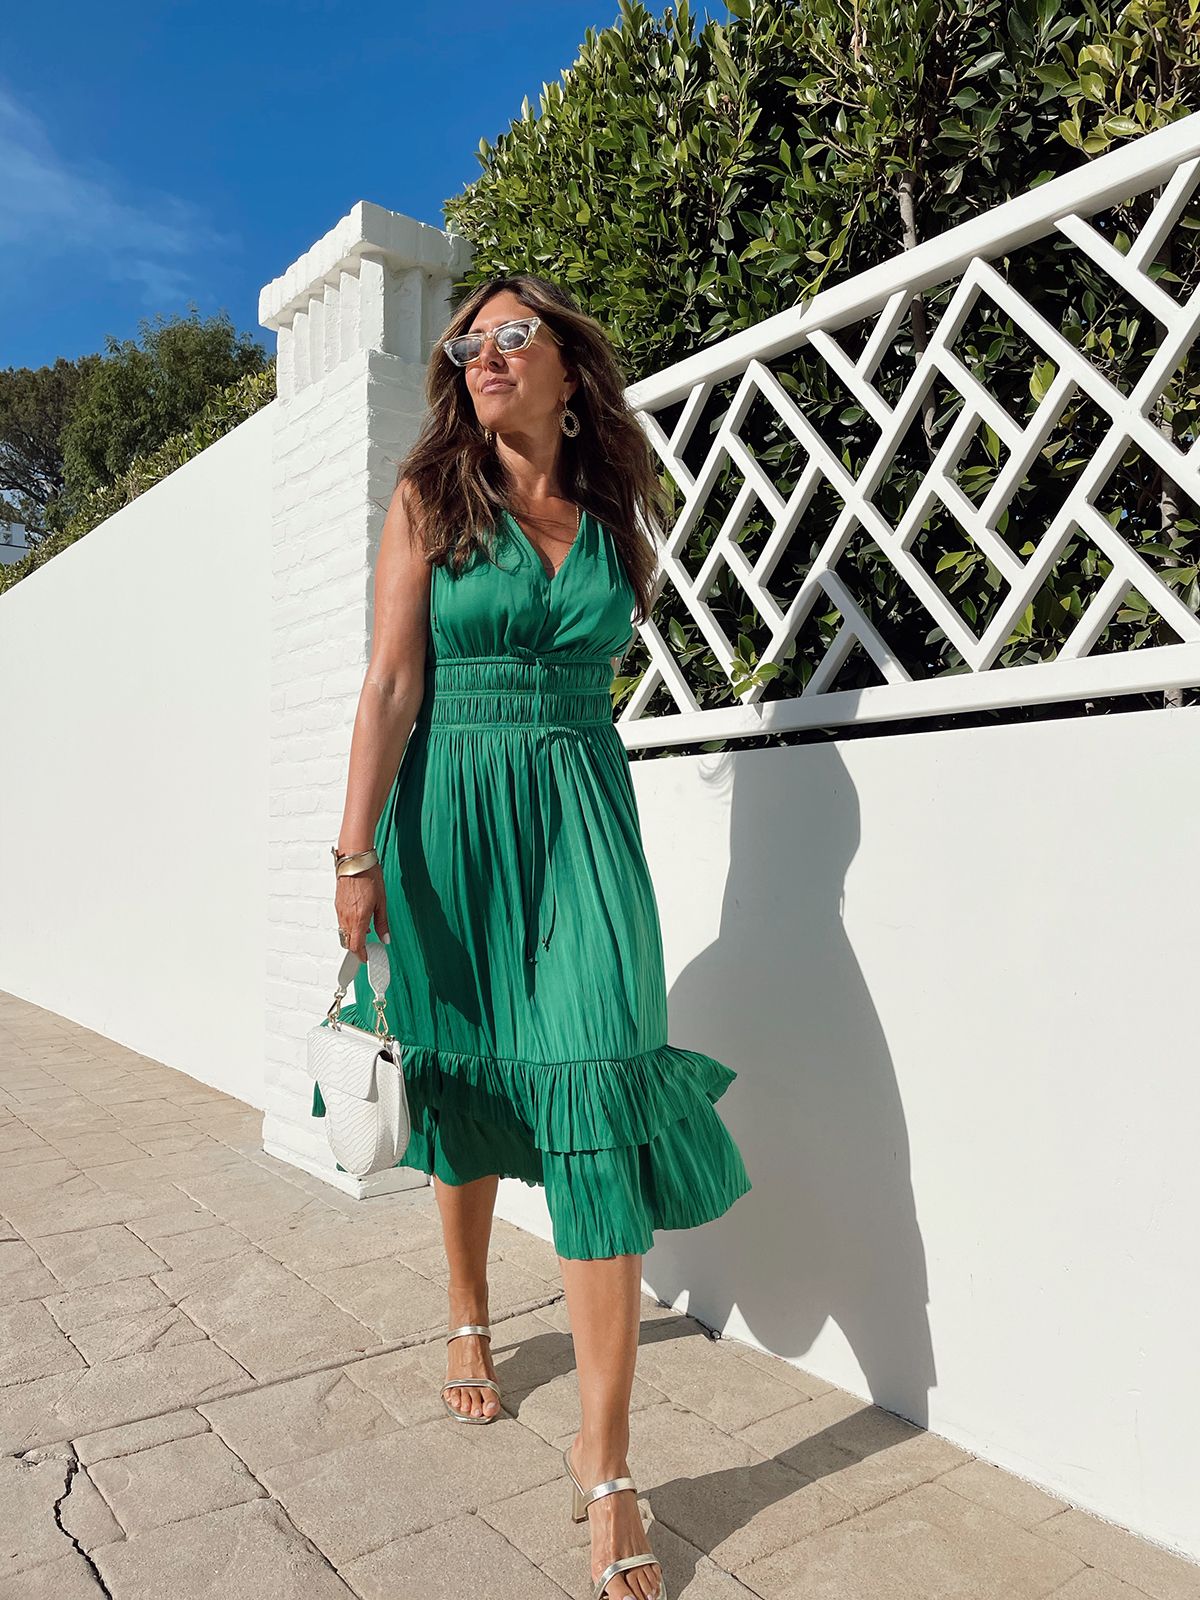 5 Summer Trends Women in Their 40s and 50s Love | Who What Wear